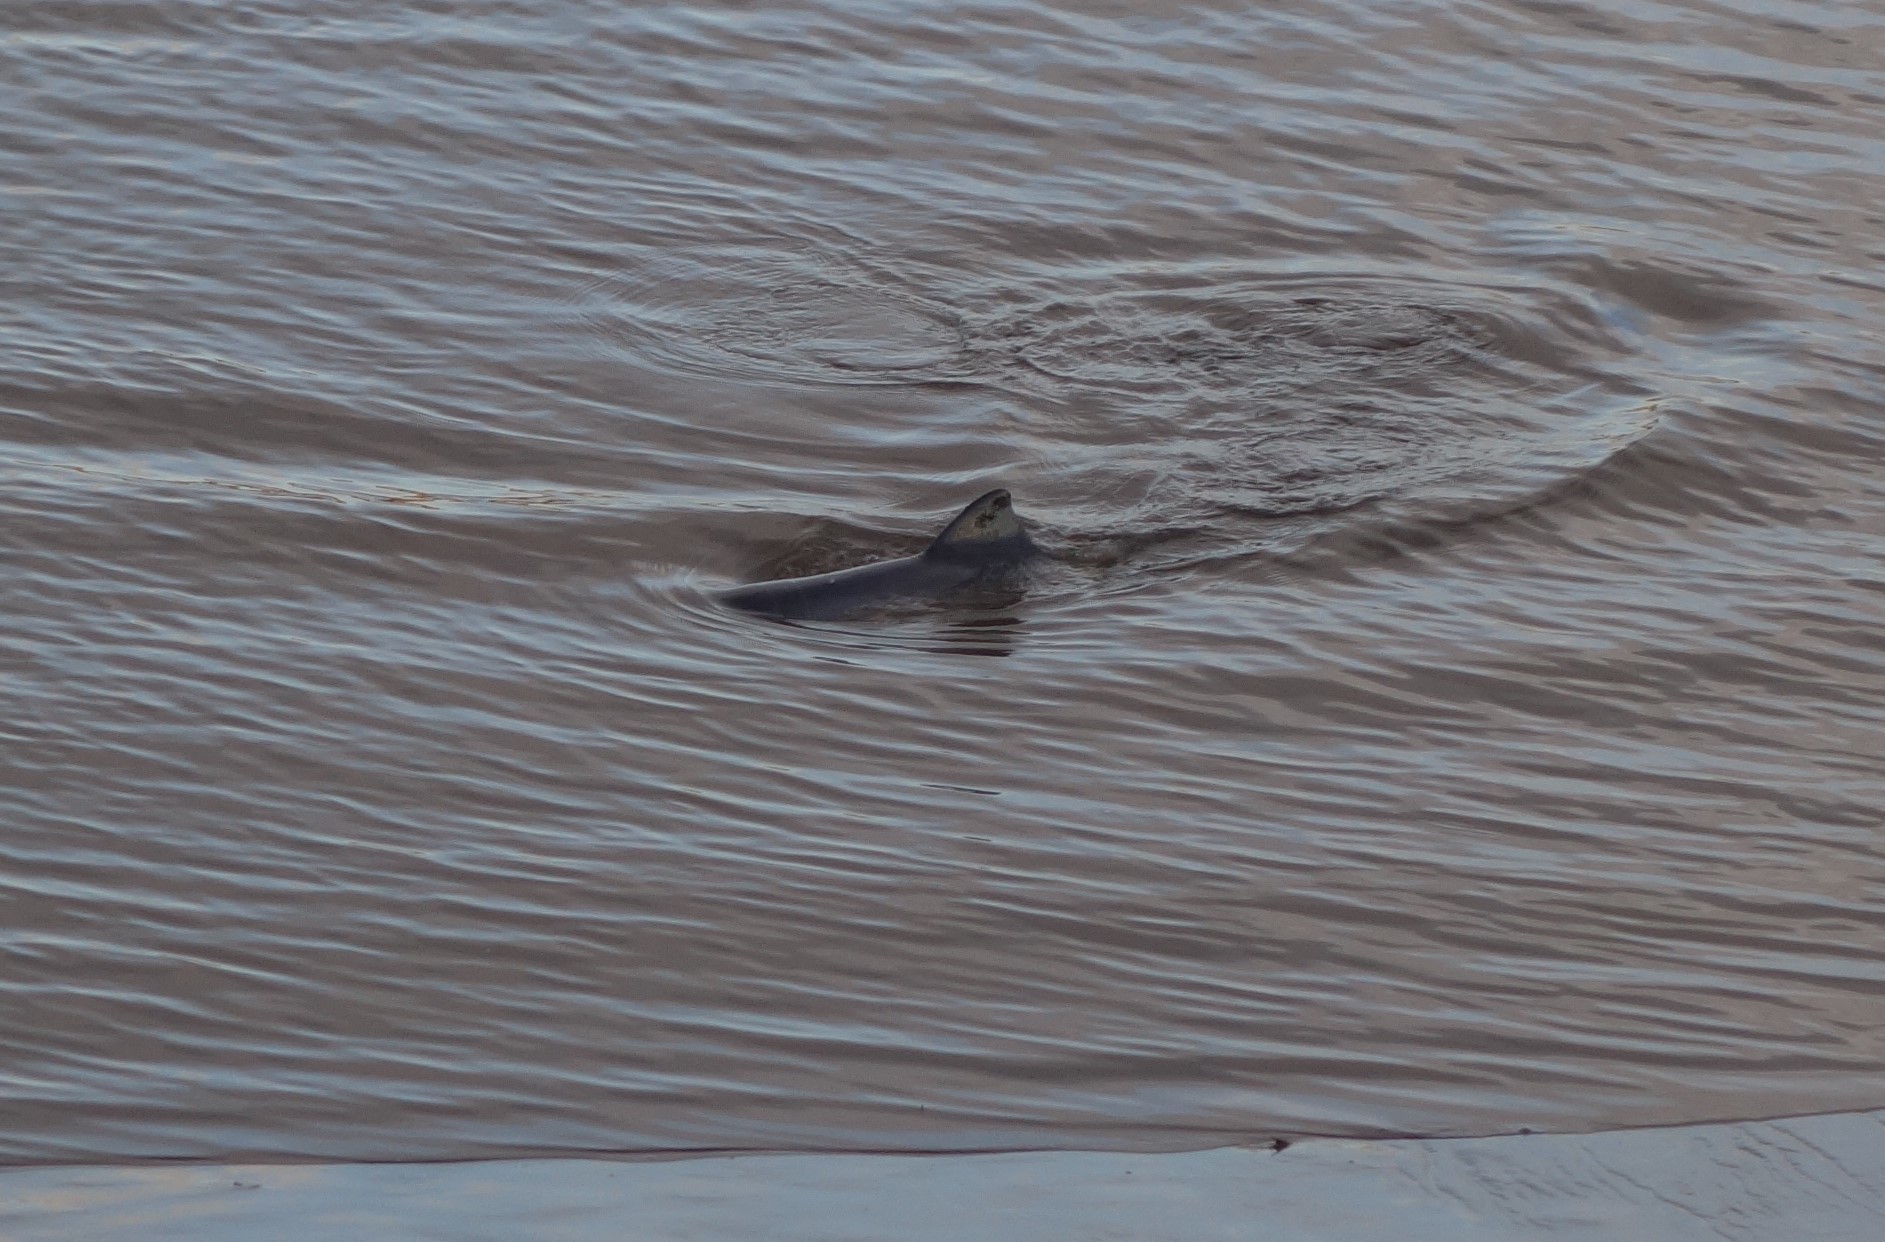 A porpoise in the Forth.